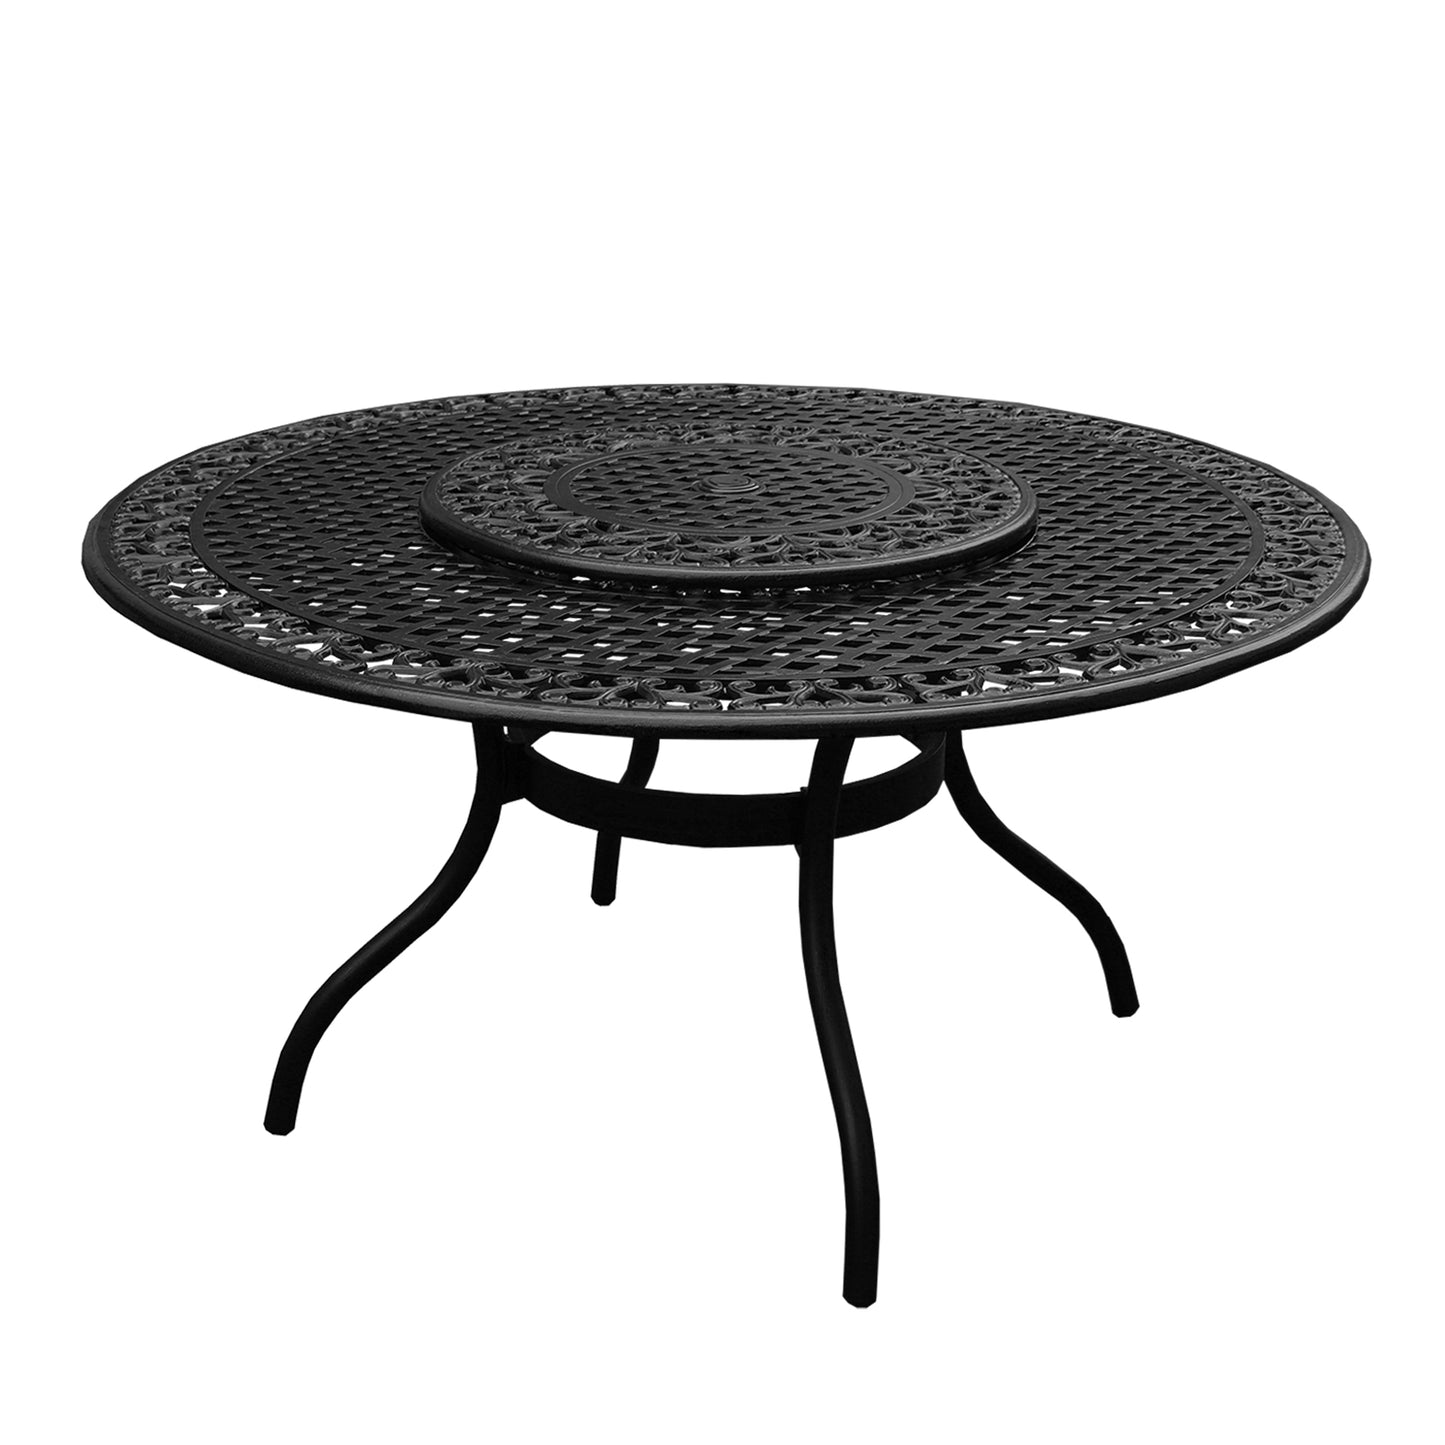 Outdoor Aluminum 7pc Round Patio Dining Set, Lazy Susan, Six Chairs